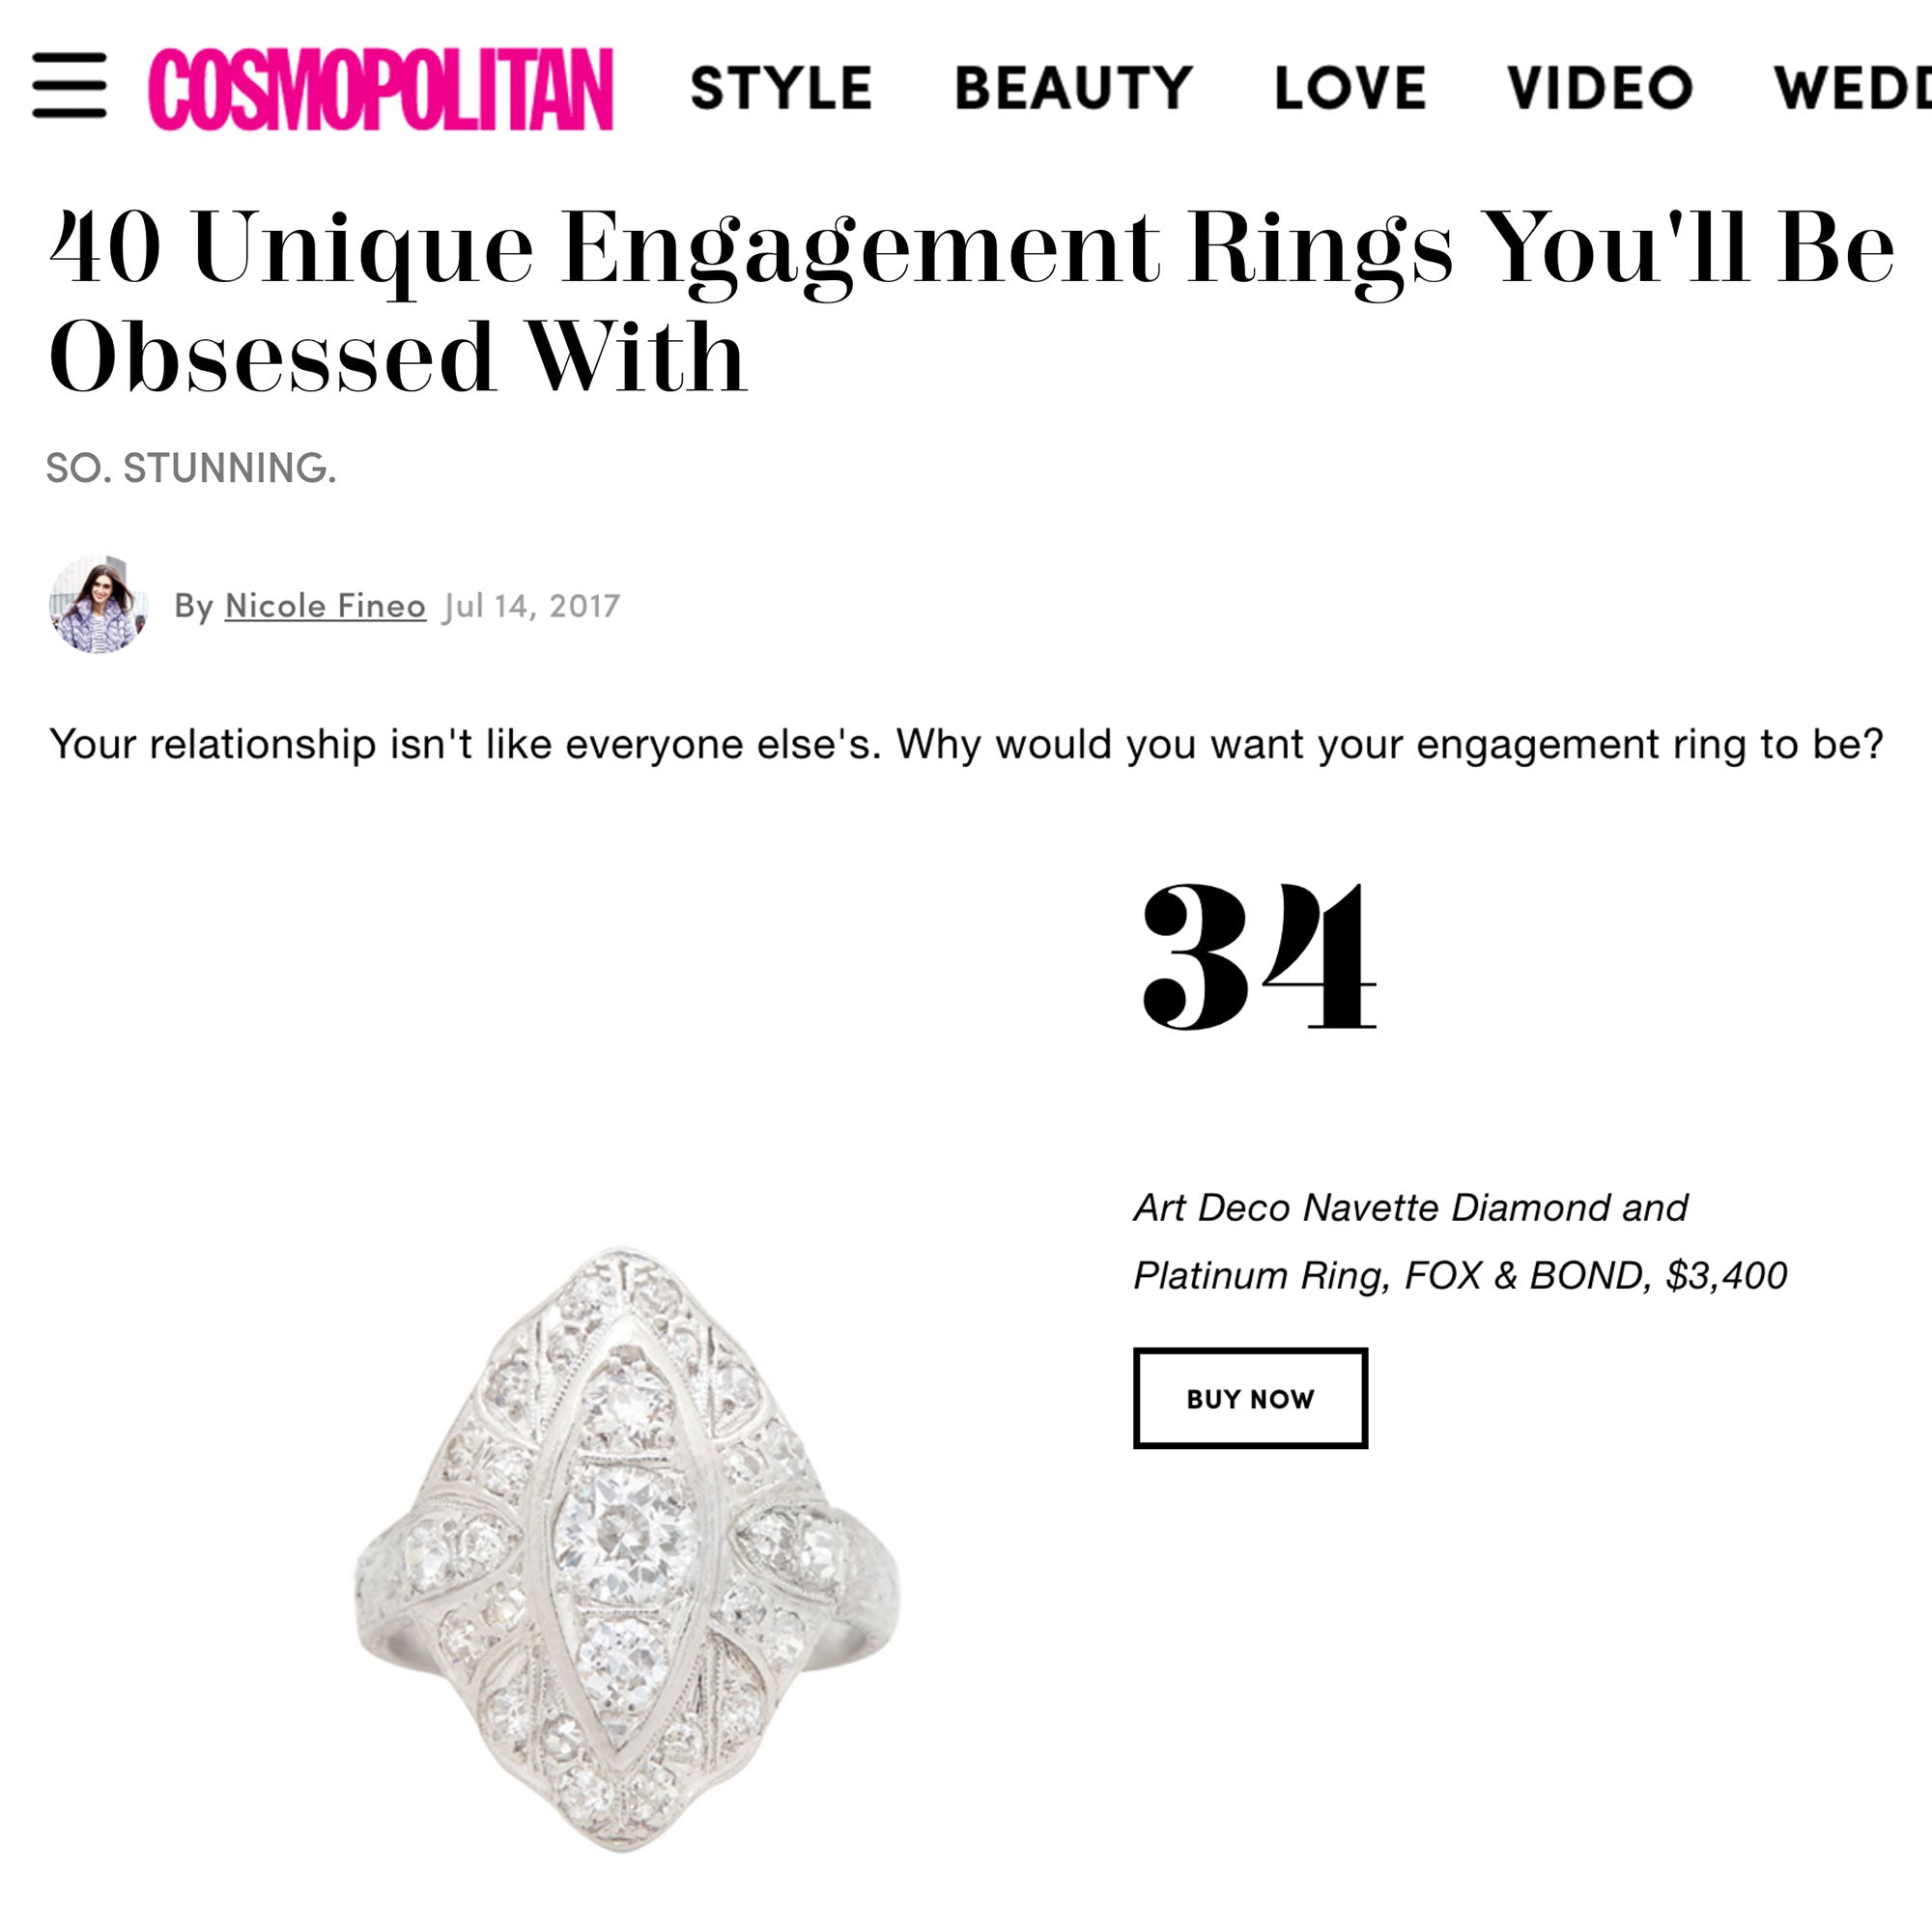 Cosmopolitan.com: 40 Unique Engagement Rings You'll Be Obsessed With